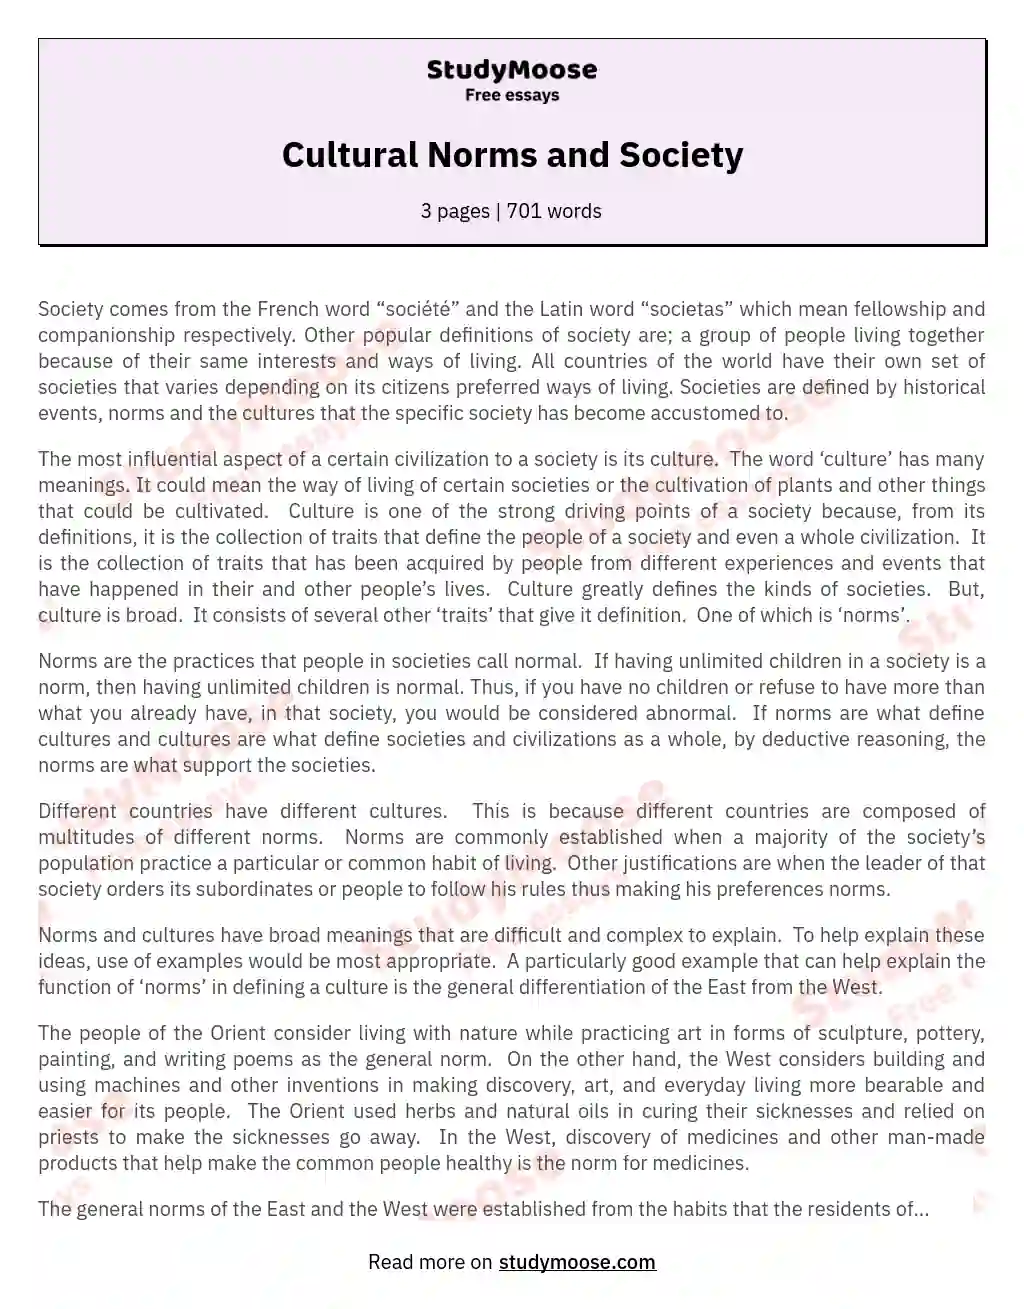 essay about cultural norms